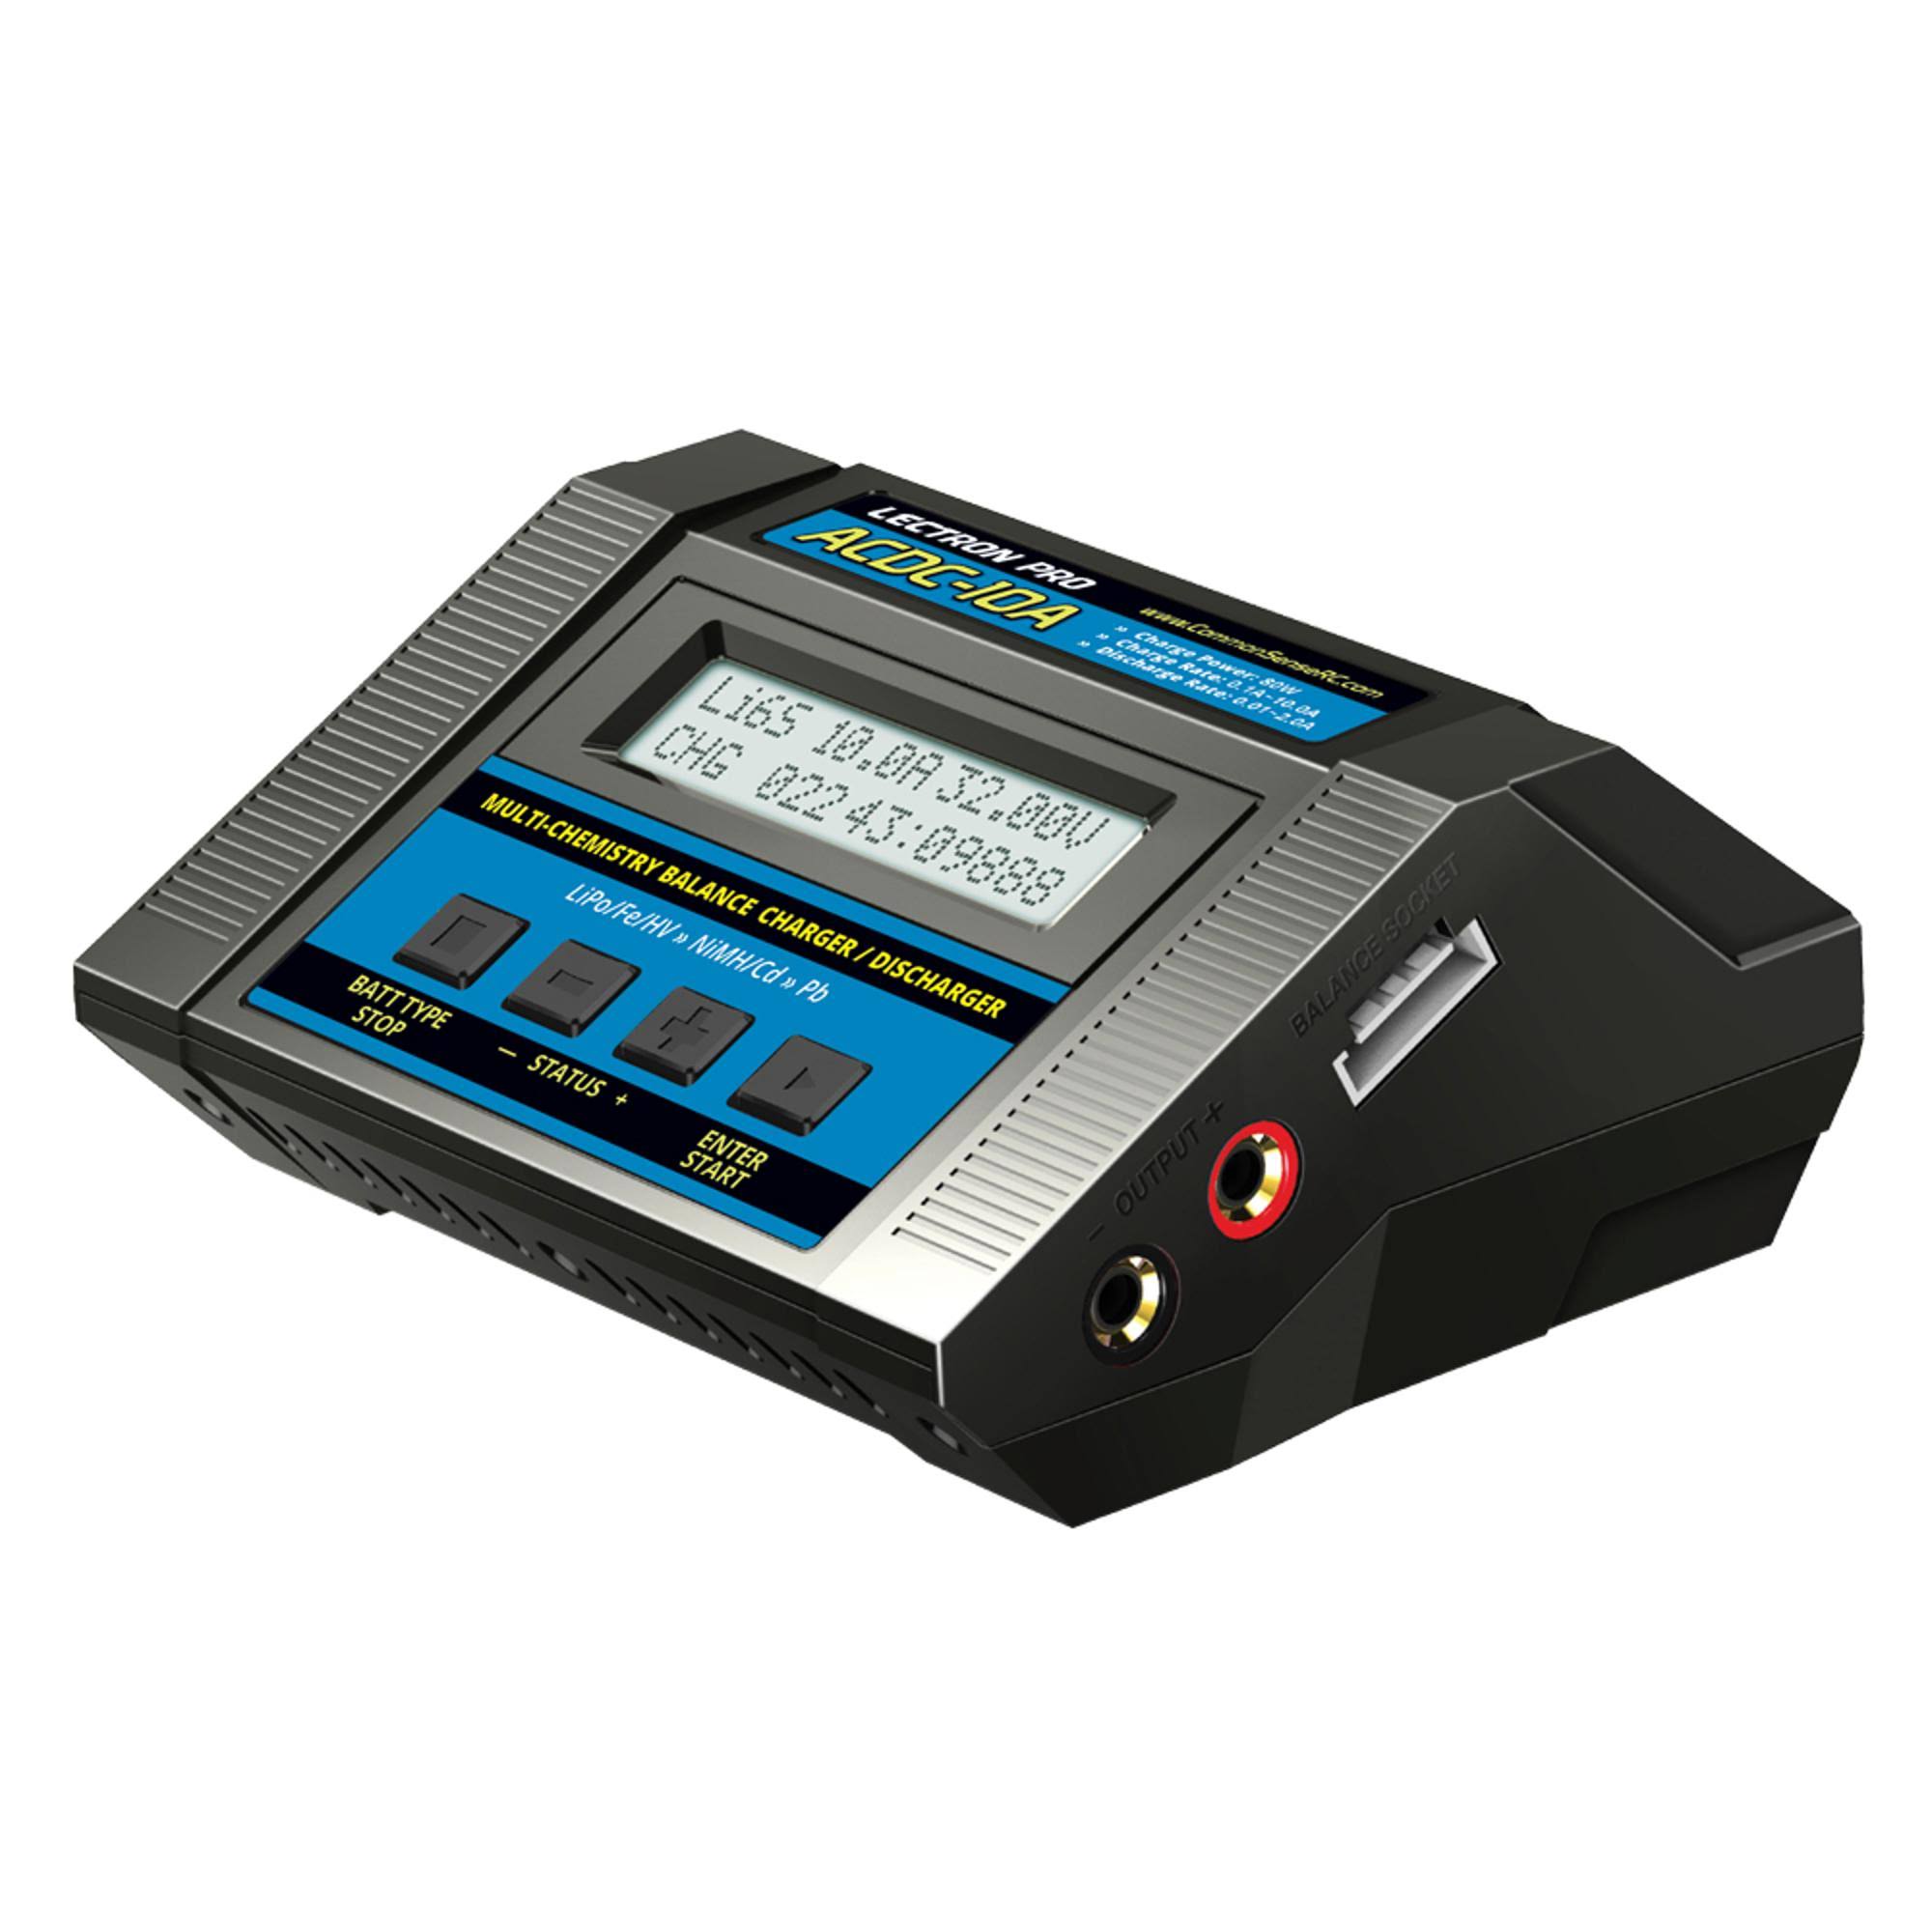 ACDC-10A 1S-6S 100W 10A Multi-Chemistry Balancing Charger (LiPo/Life/LiHV/NiMH)